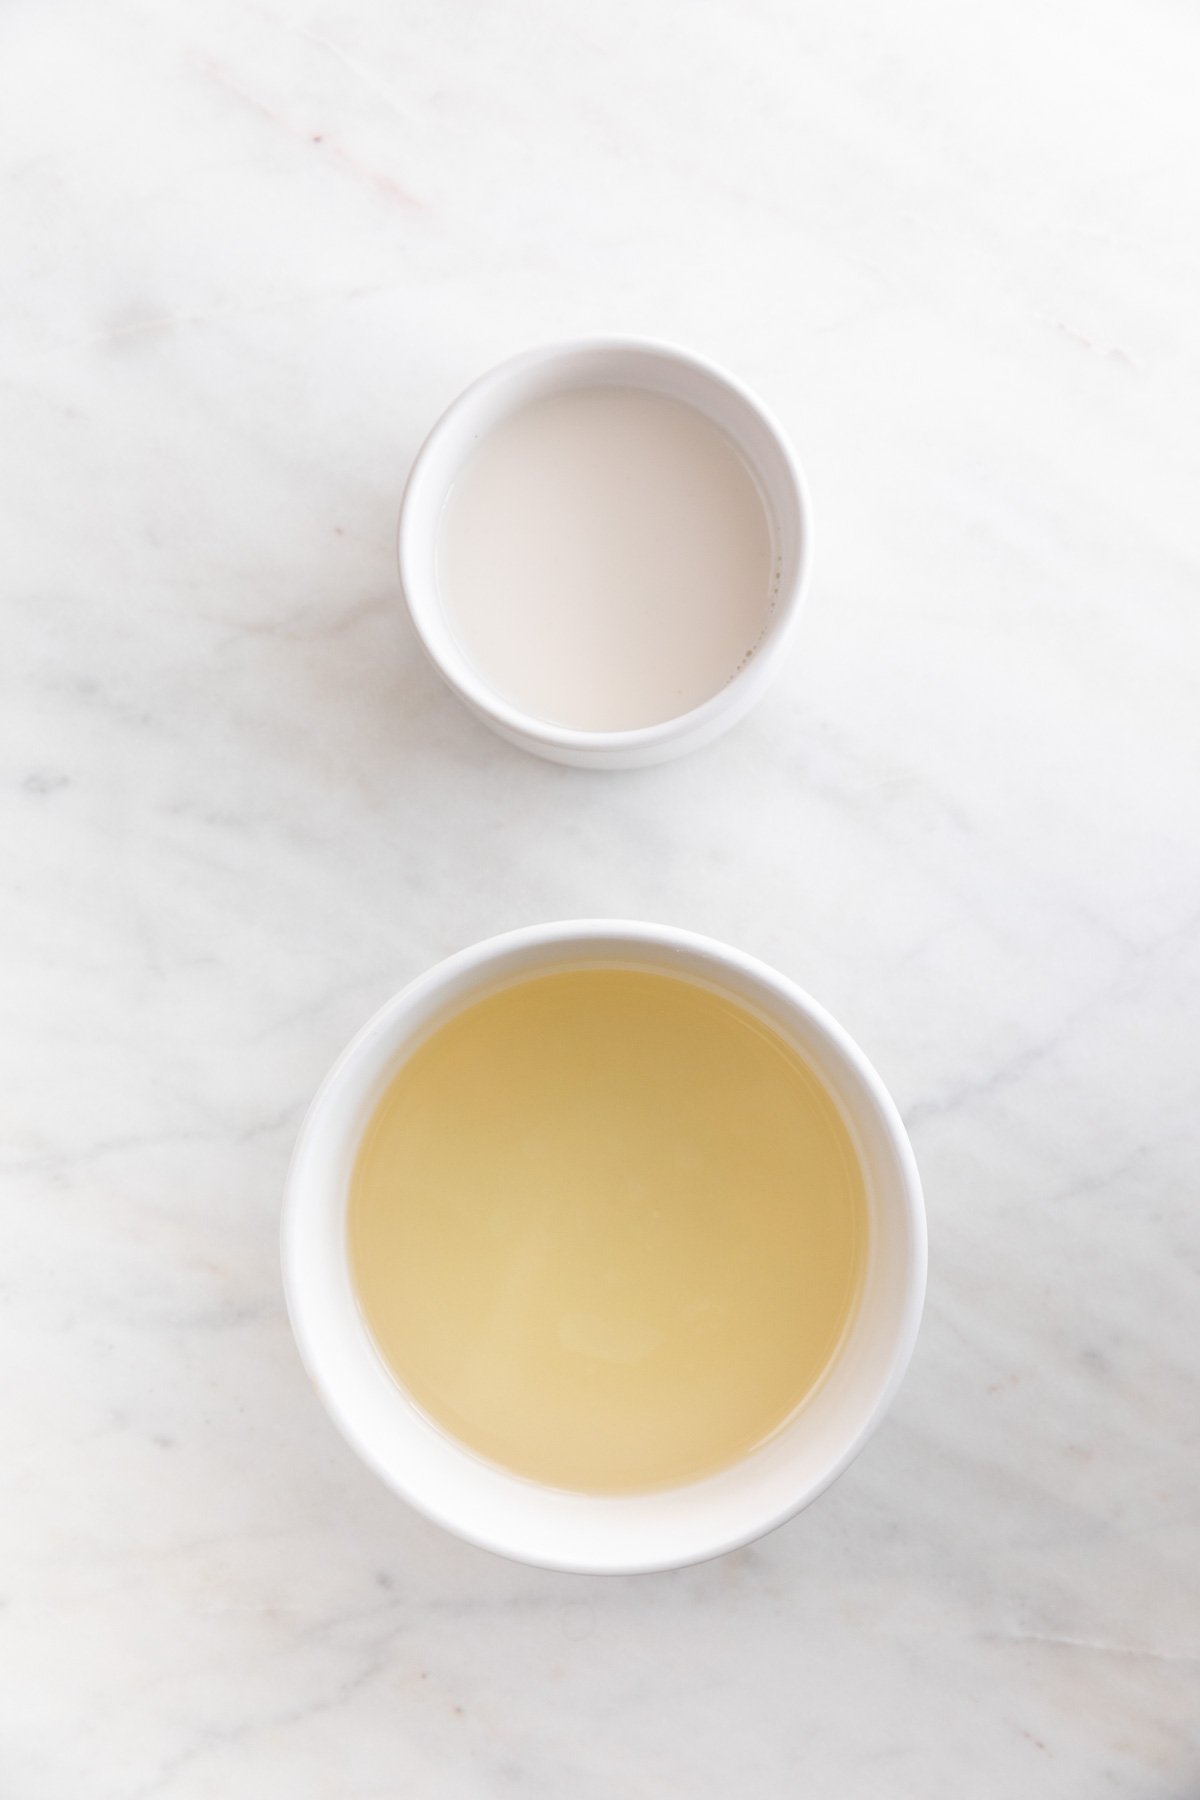 A bowl with soy milk and another bowl with oil.